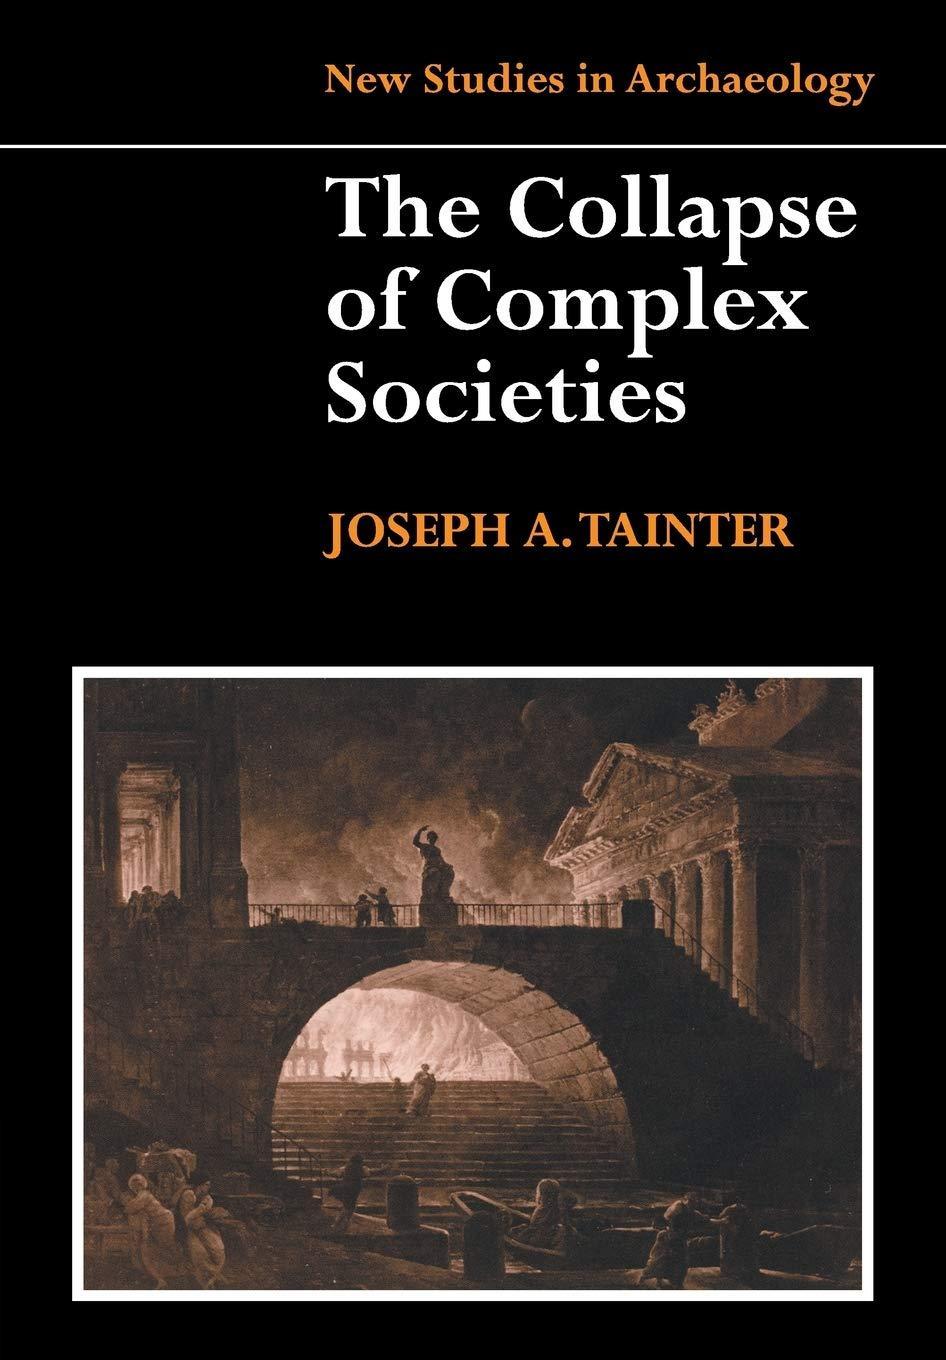 Joseph A. Tainter: The Collapse of Complex Societies. (1990)